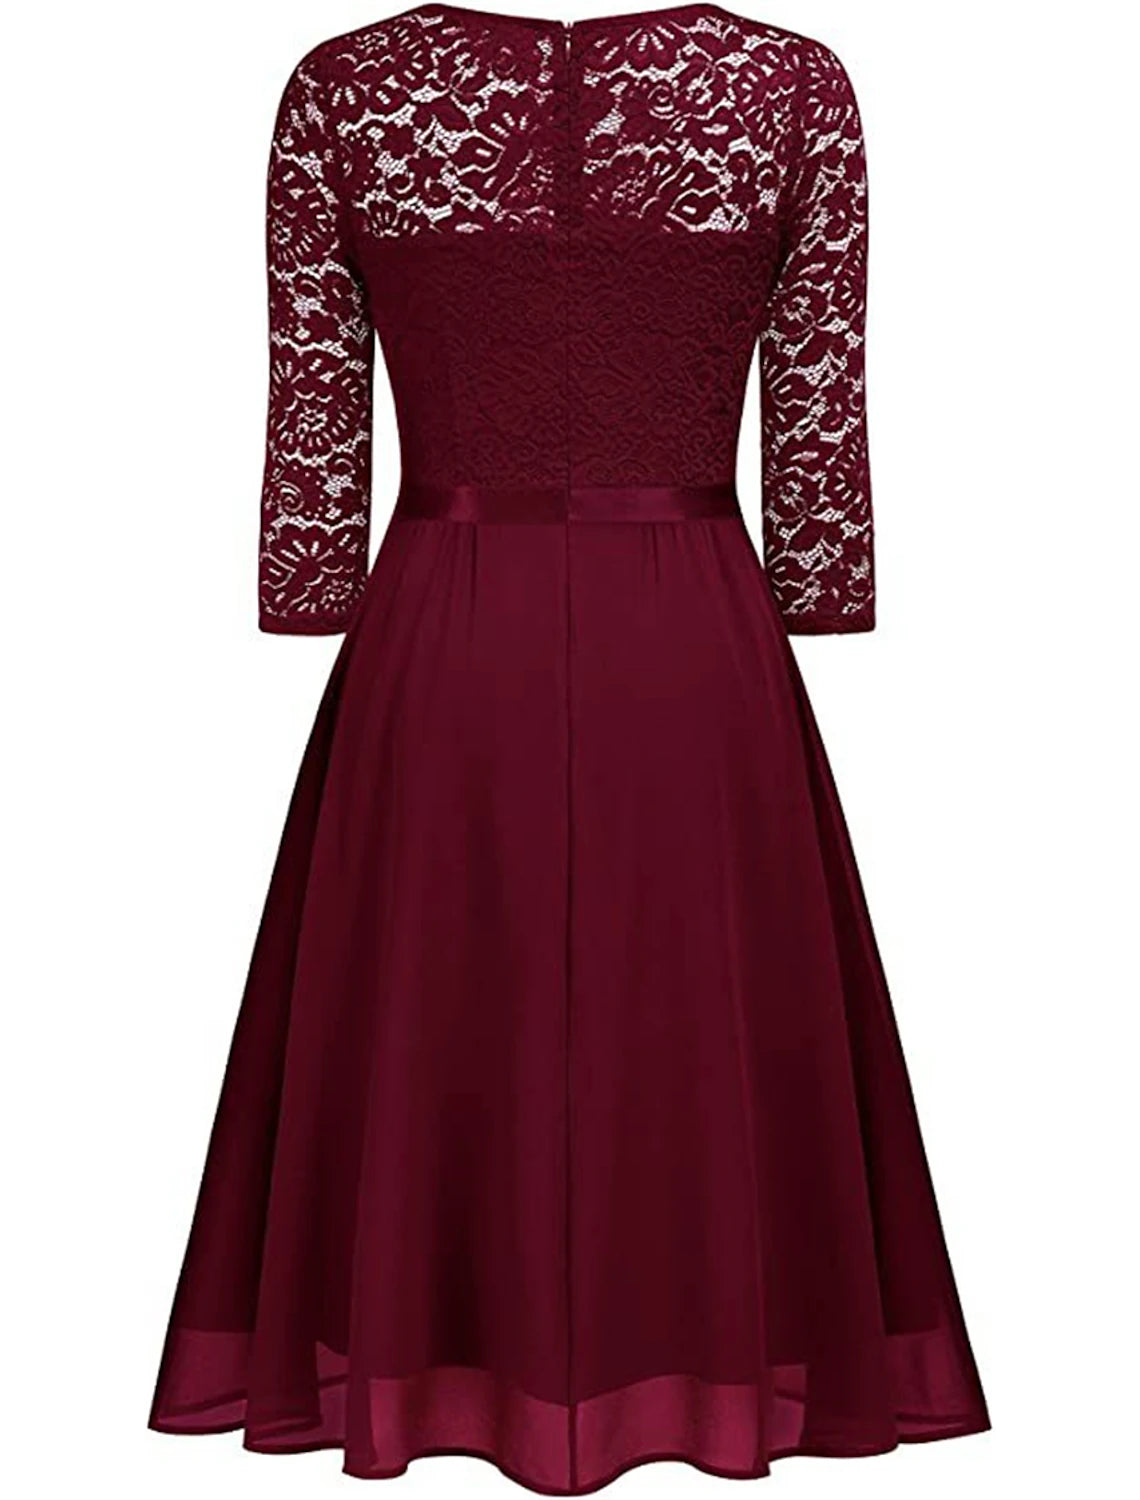 Women's Party Dress Lace Dress Homecoming Dress Midi Dress Black Wine Navy Blue Half Sleeve Pure Color Lace Spring Fall Winter V Neck Fashion Wedding Guest Birthday Vacation